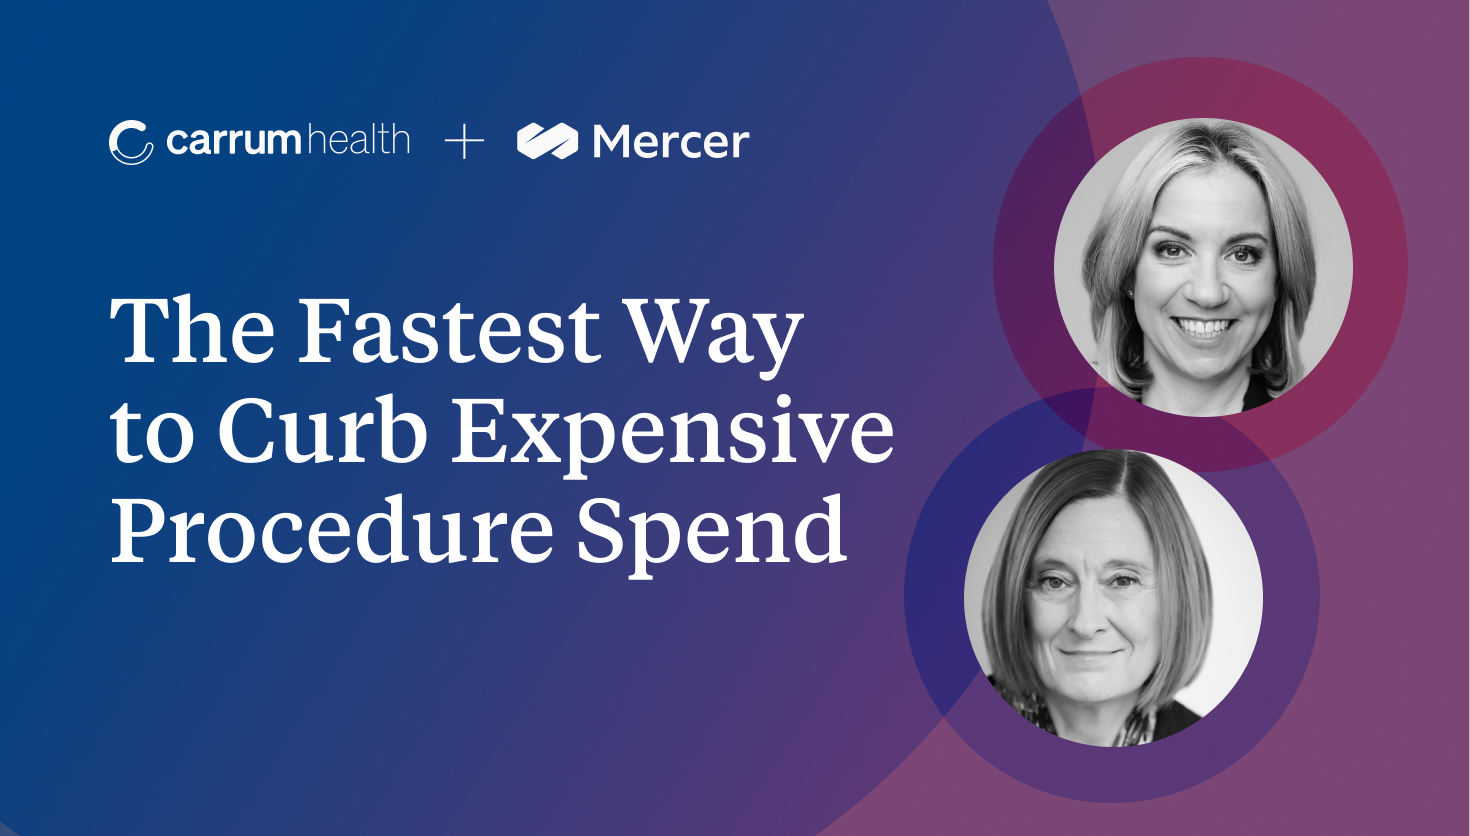 Healthcare spend webinar with Mercer and Carrum